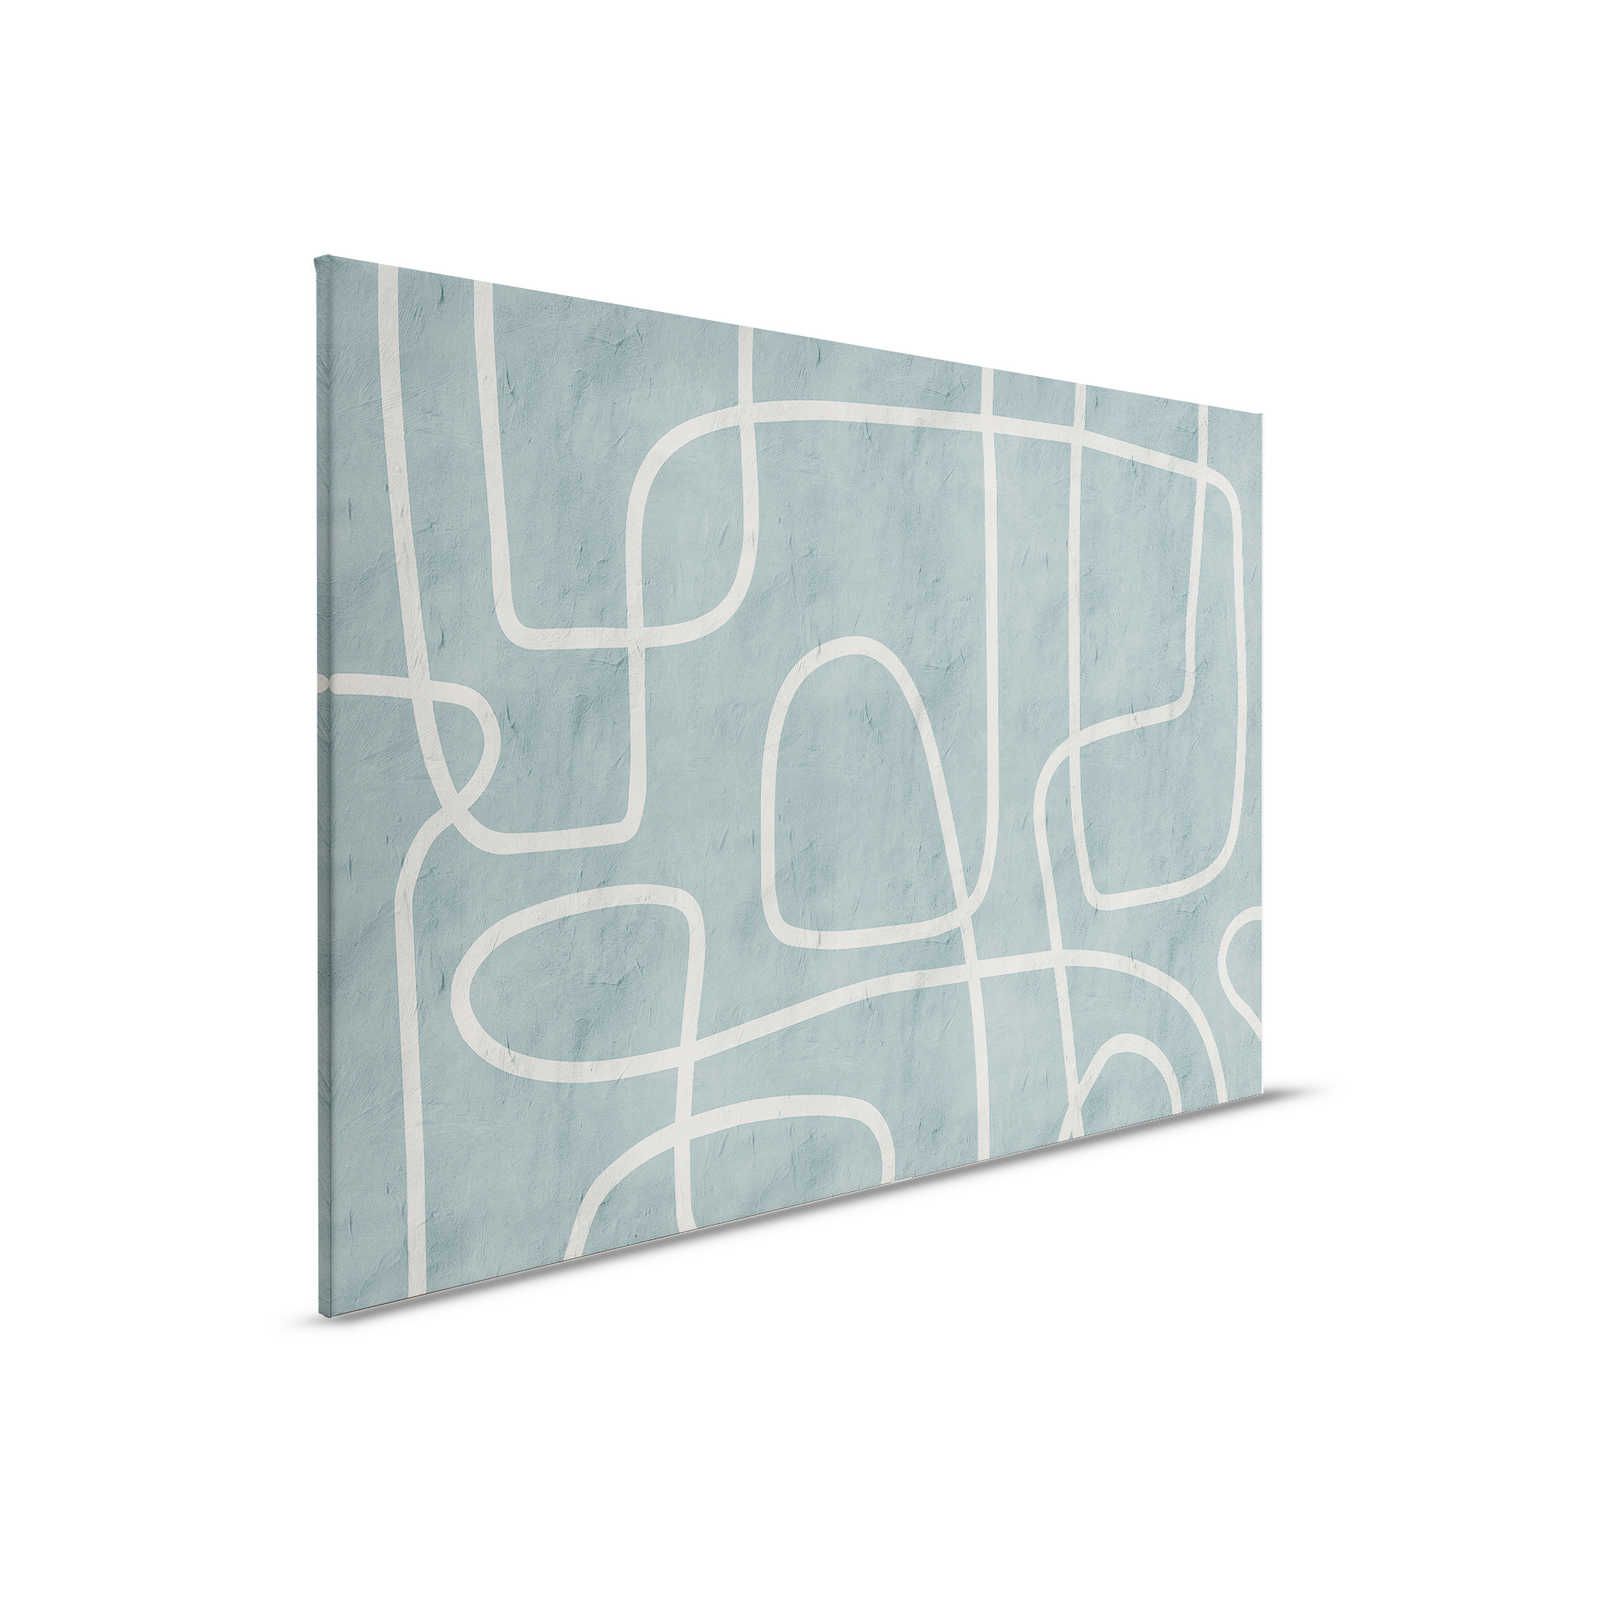         Serengeti 4 - Canvas painting Clay wall in light blue with line pattern - 0,90 m x 0,60 m
    